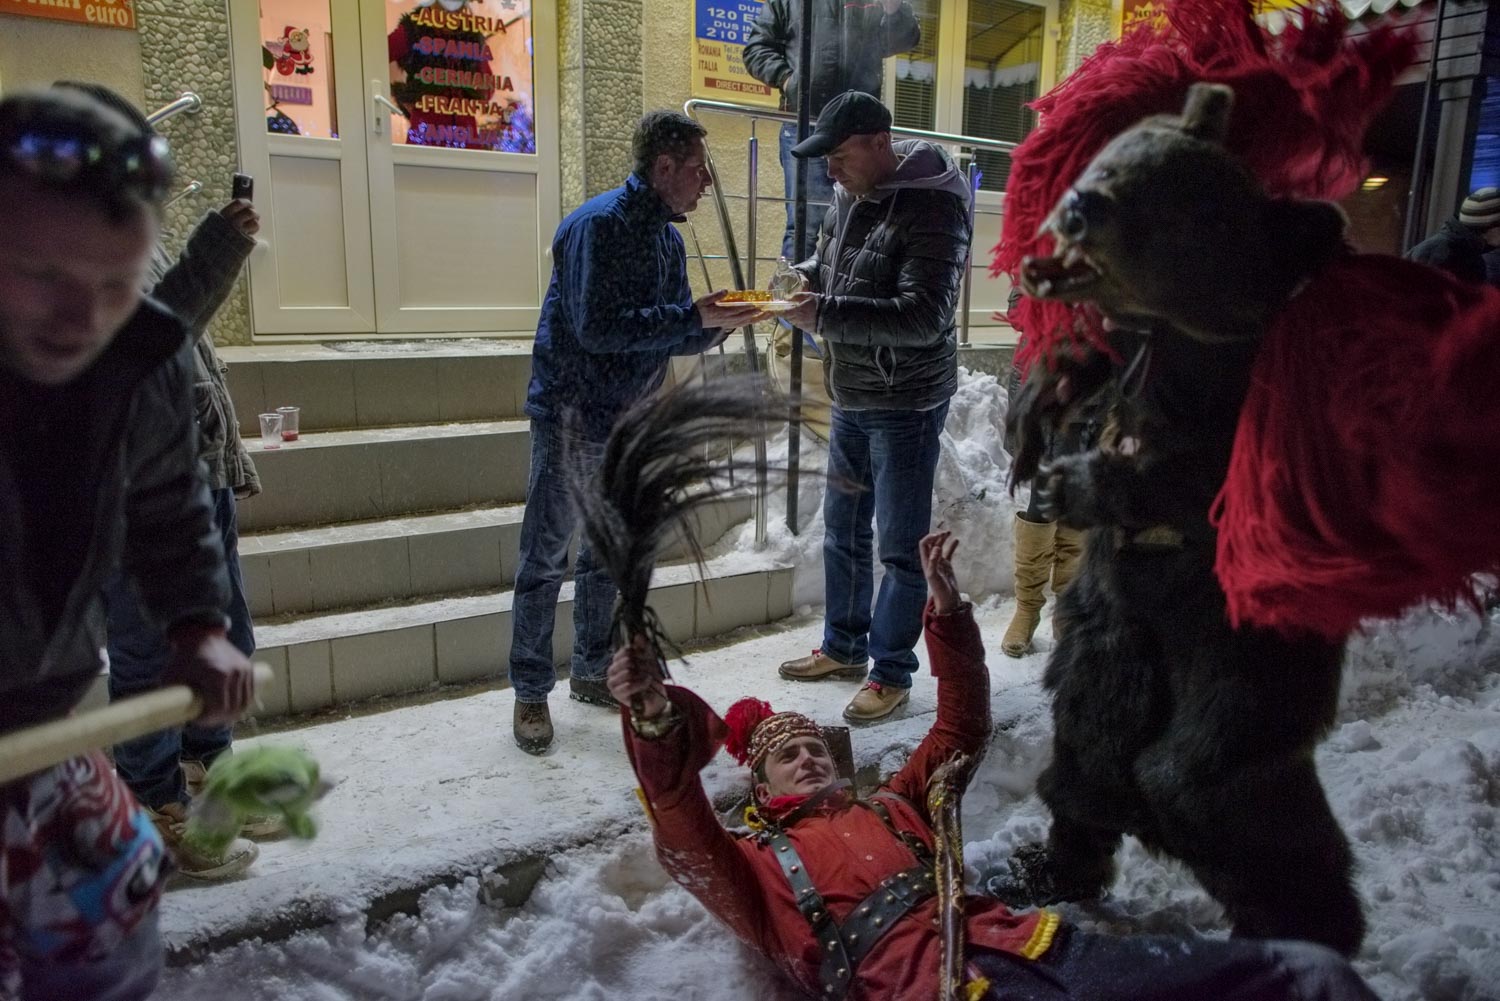  After winning first place at Comăneşti's annual Bear Parade, Toloacă's troupe celebrates in the streets, singing, dancing, and toasting with homemade palinka liquor handed out by the locals. December 30, 2014. Comăneşti town, Bacău county, Romania. 